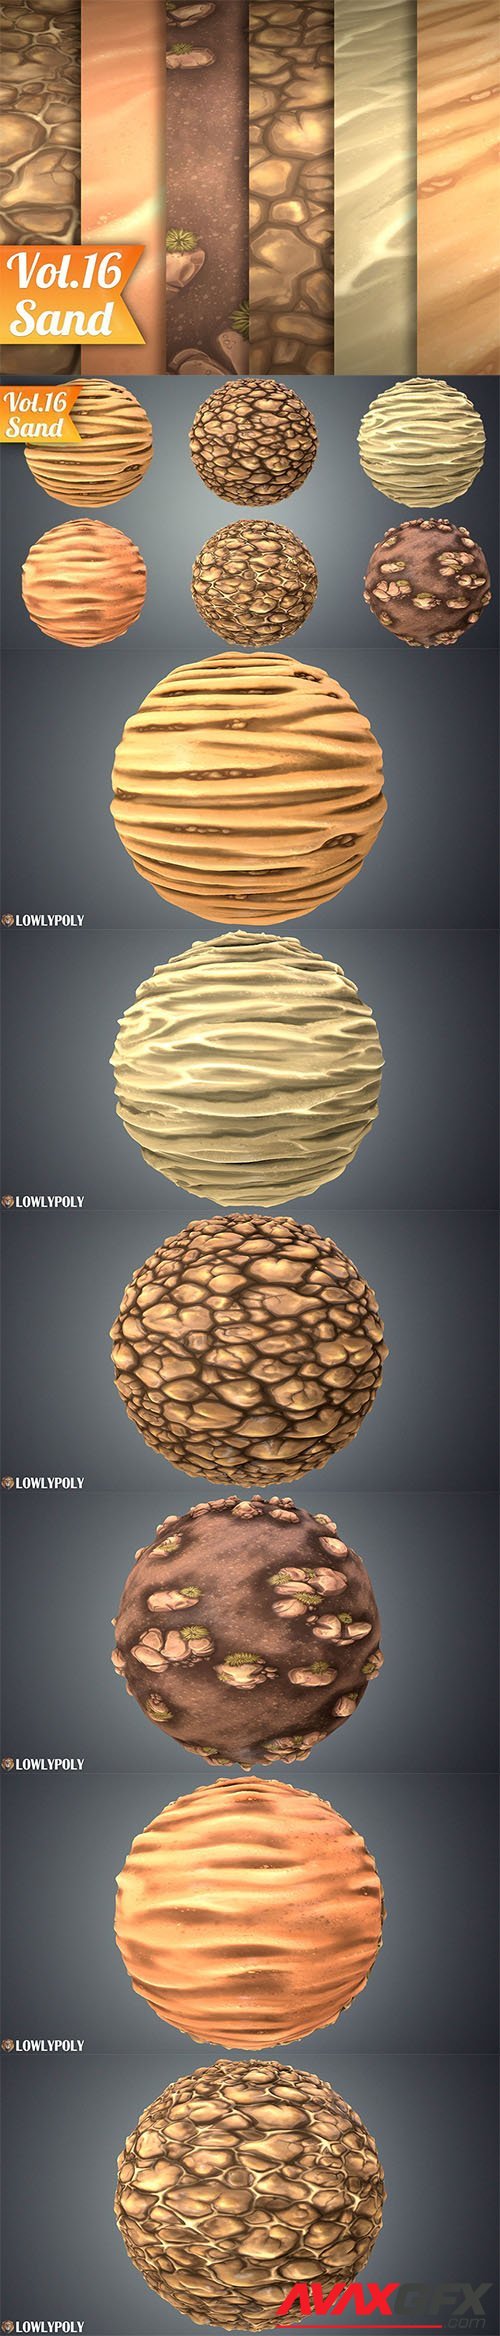 Cgtrader - Stylized Sand Vol 16 - Hand Painted Texture Pack Texture